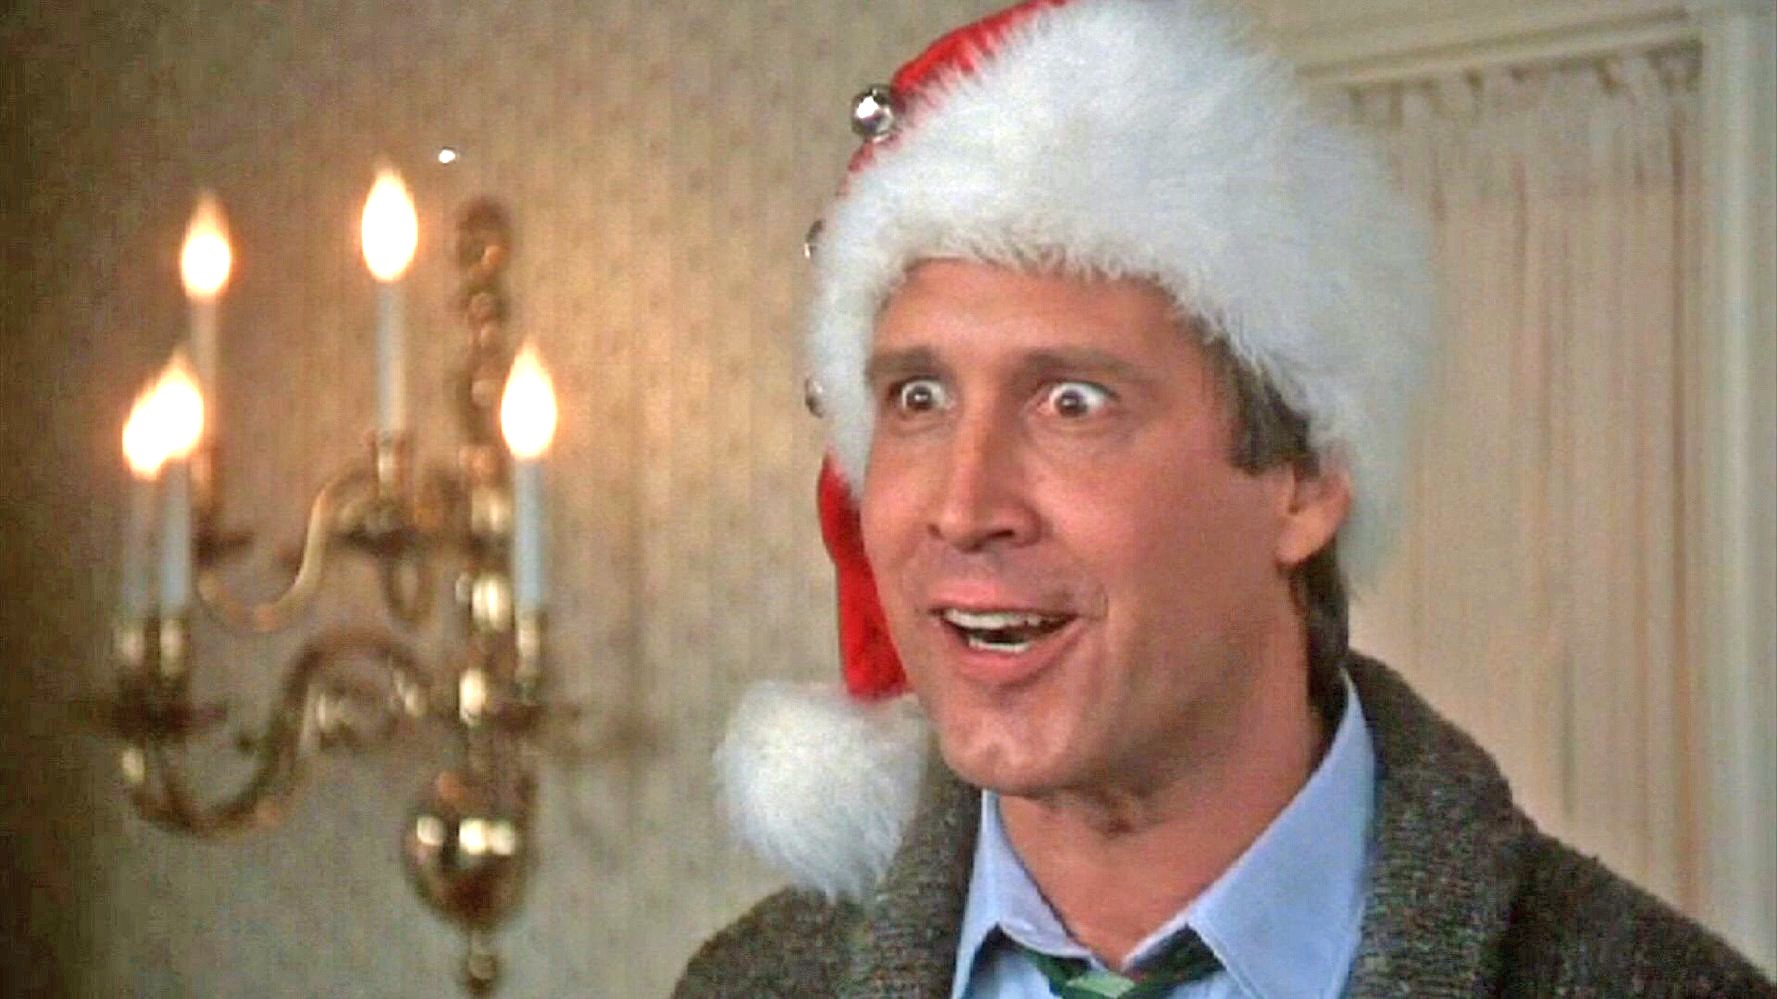 Blast From The Past National Lampoon S Christmas Vacation Movies San Luis Obispo New Times San Luis Obispo